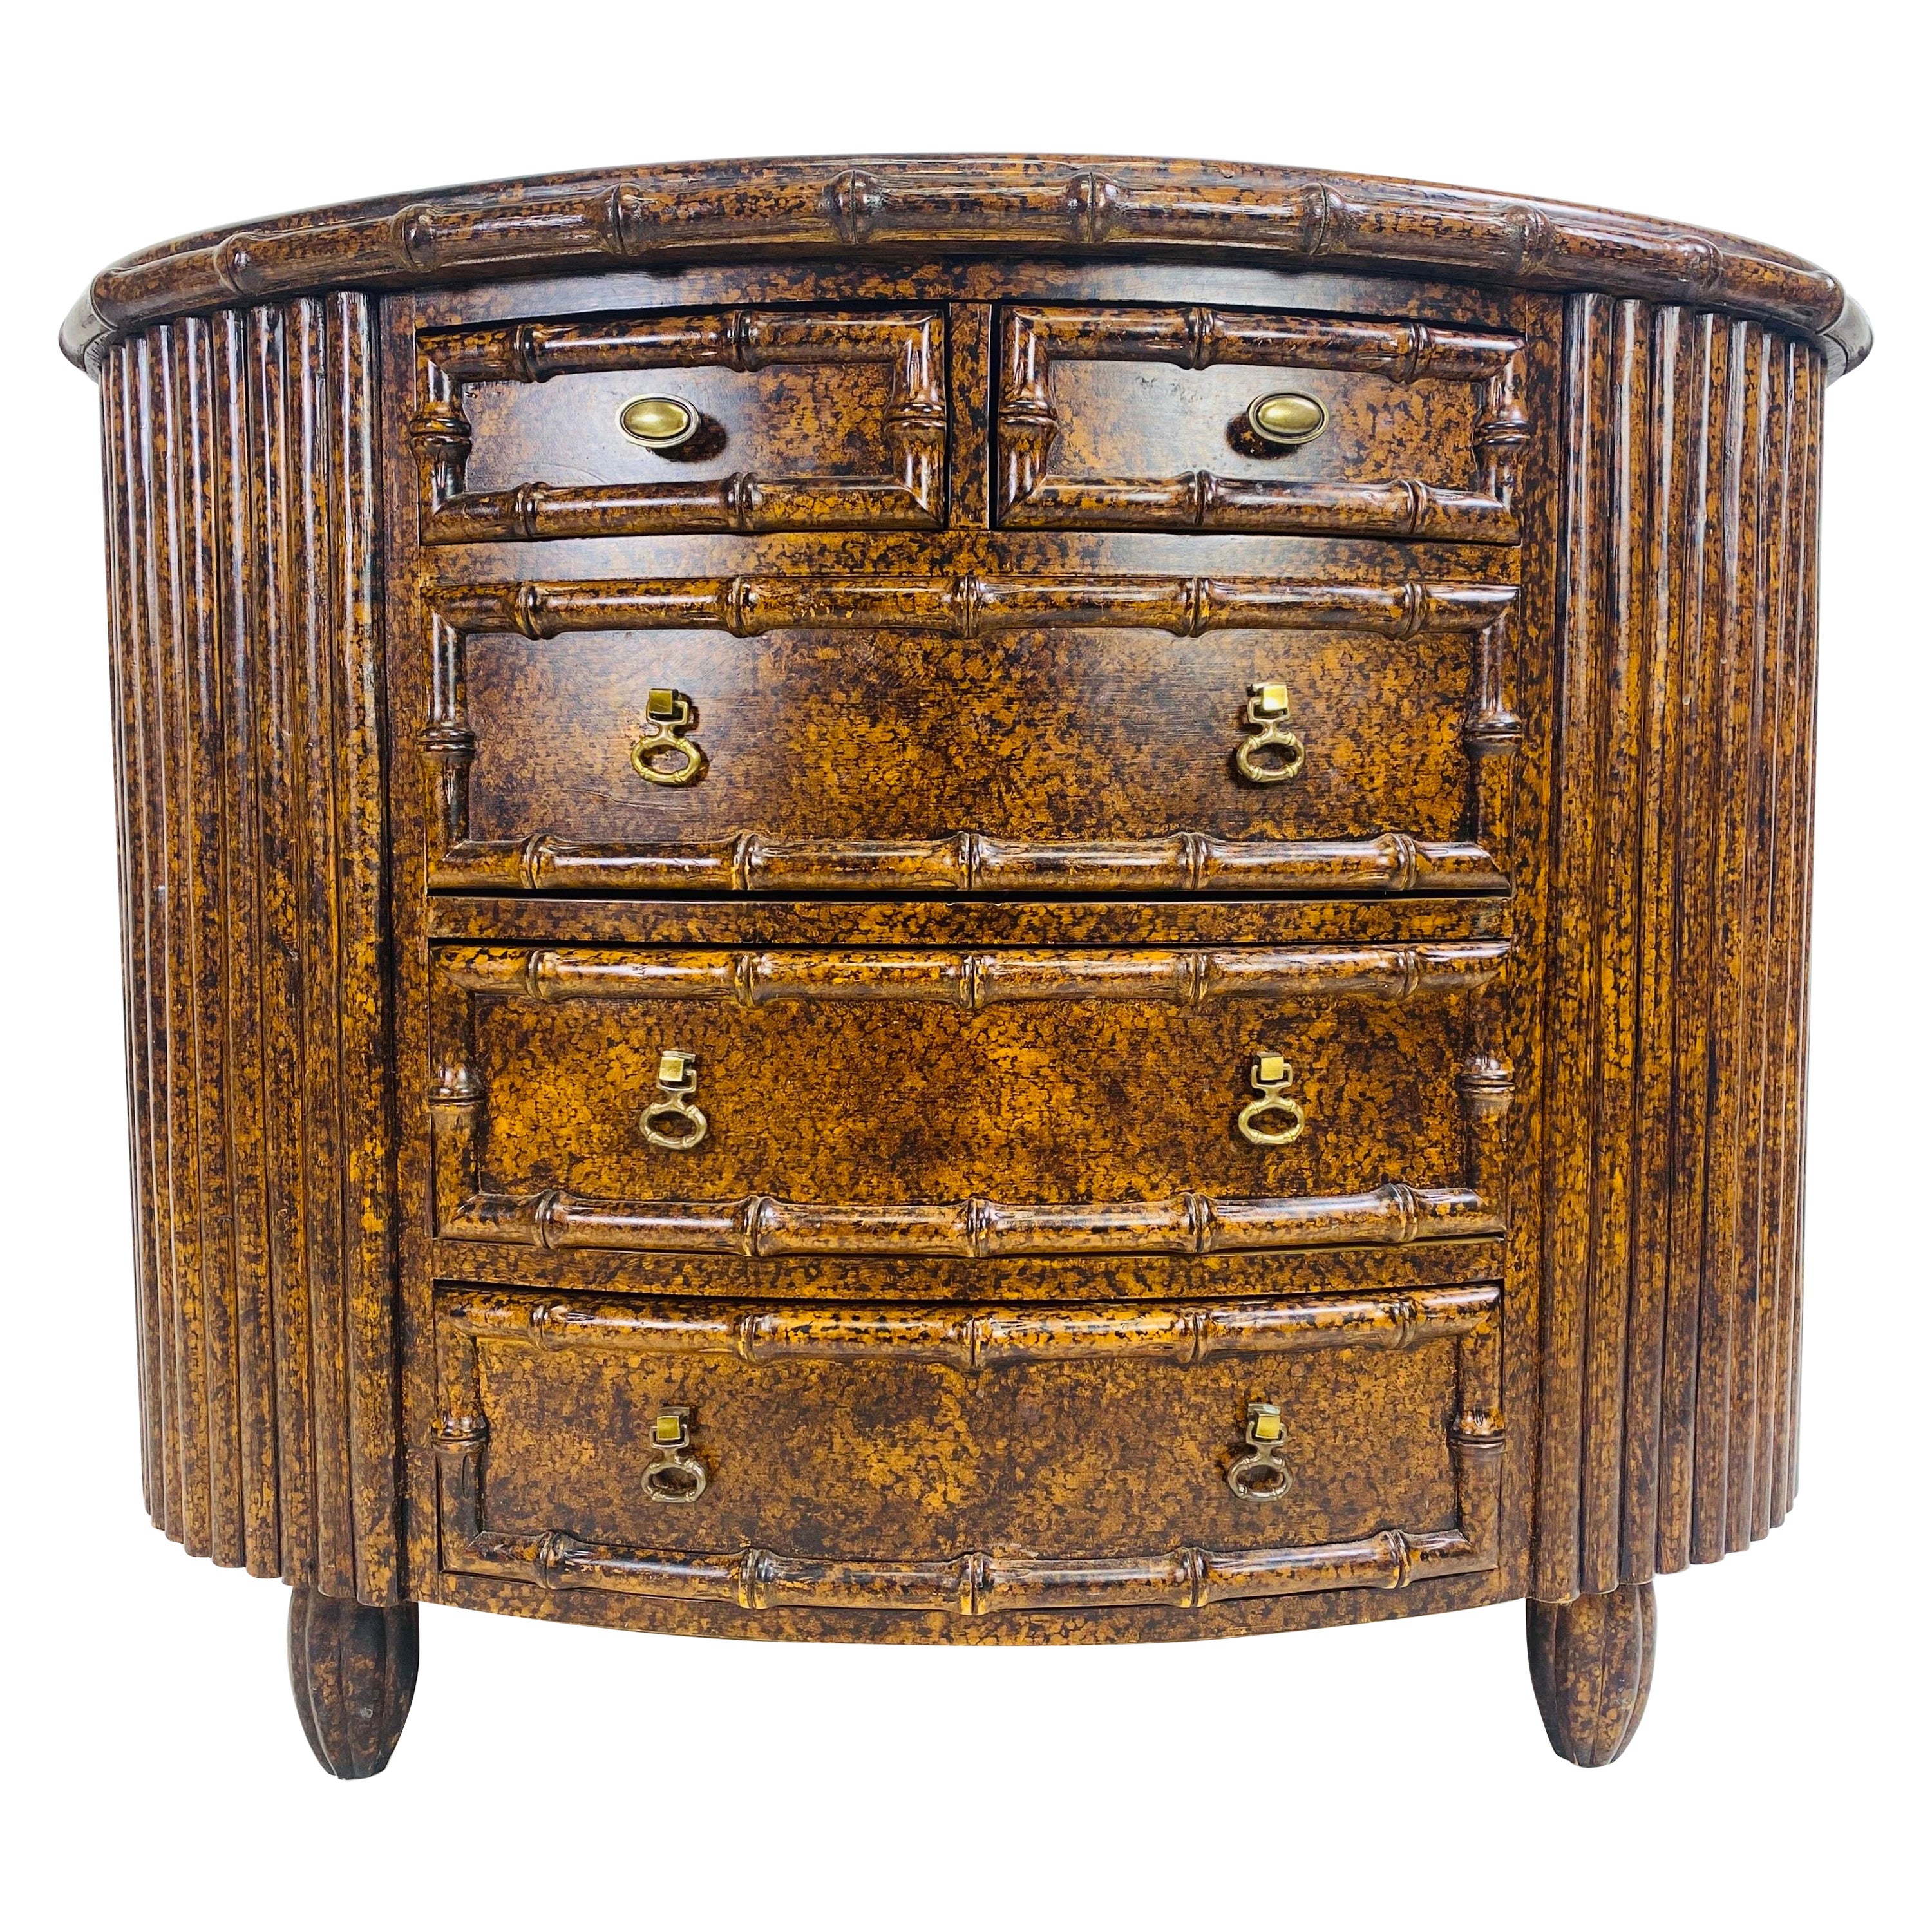 Regency style faux tortoiseshell chest of drawers after Maitland Smith For Sale